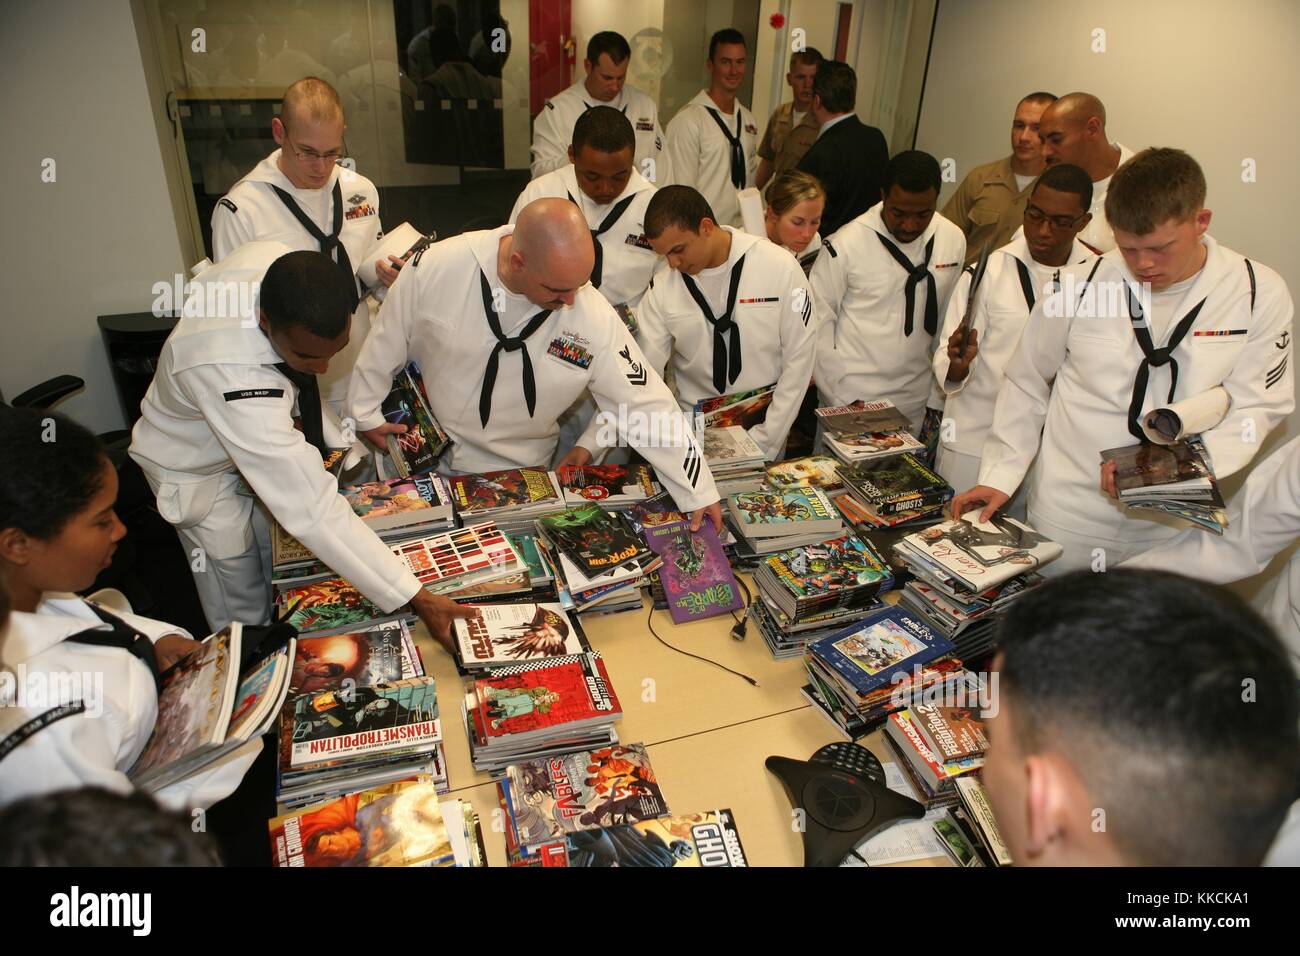 Sailors and Marines look through comic books during a tour of the DC Comics facility during Fleet Week New York 2012, New York. Image courtesy Mass Communication Specialist 1st Class David P. Coleman/US Navy, 2012. Stock Photo